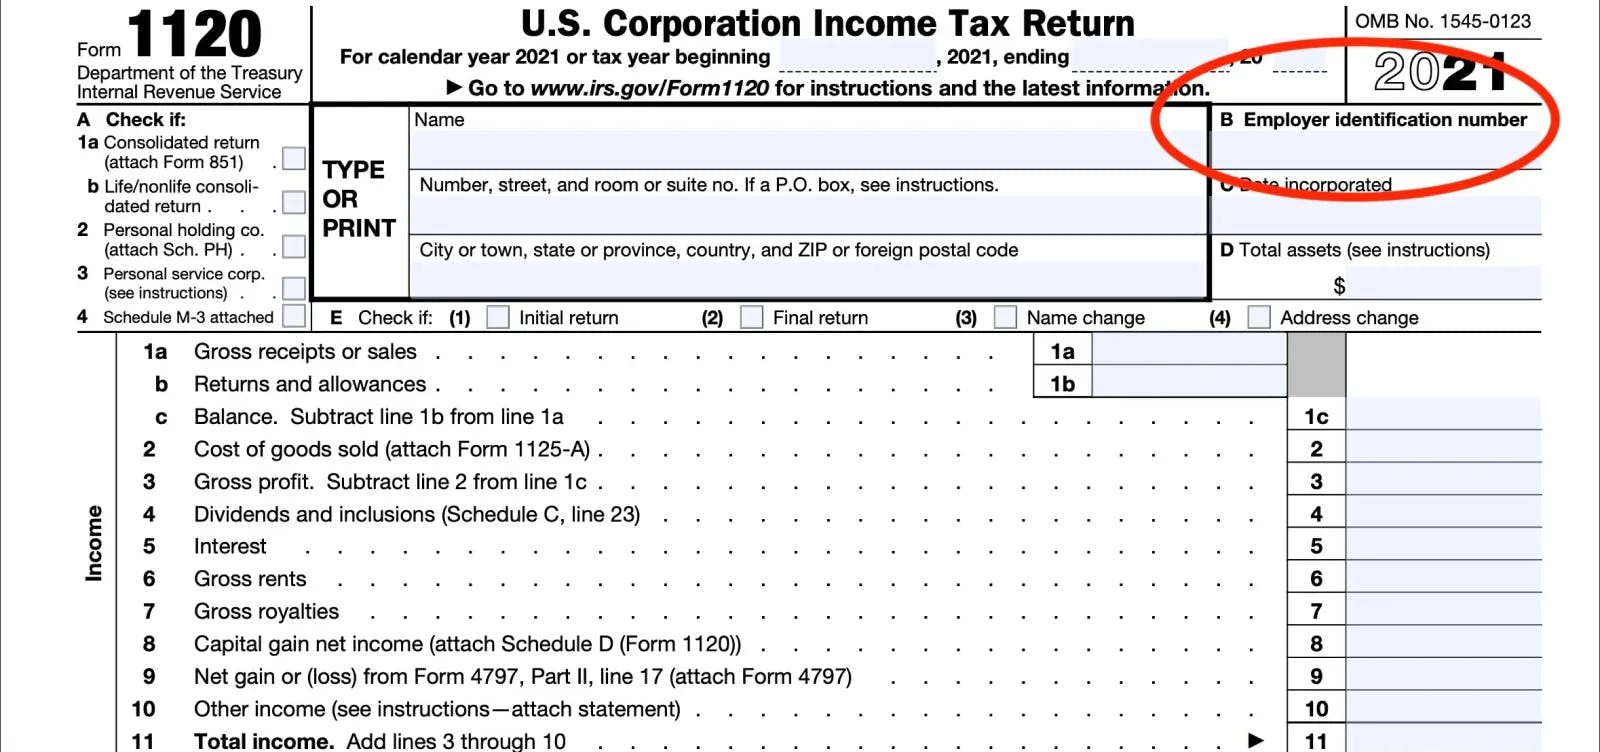 US corporation income tax report form 1120